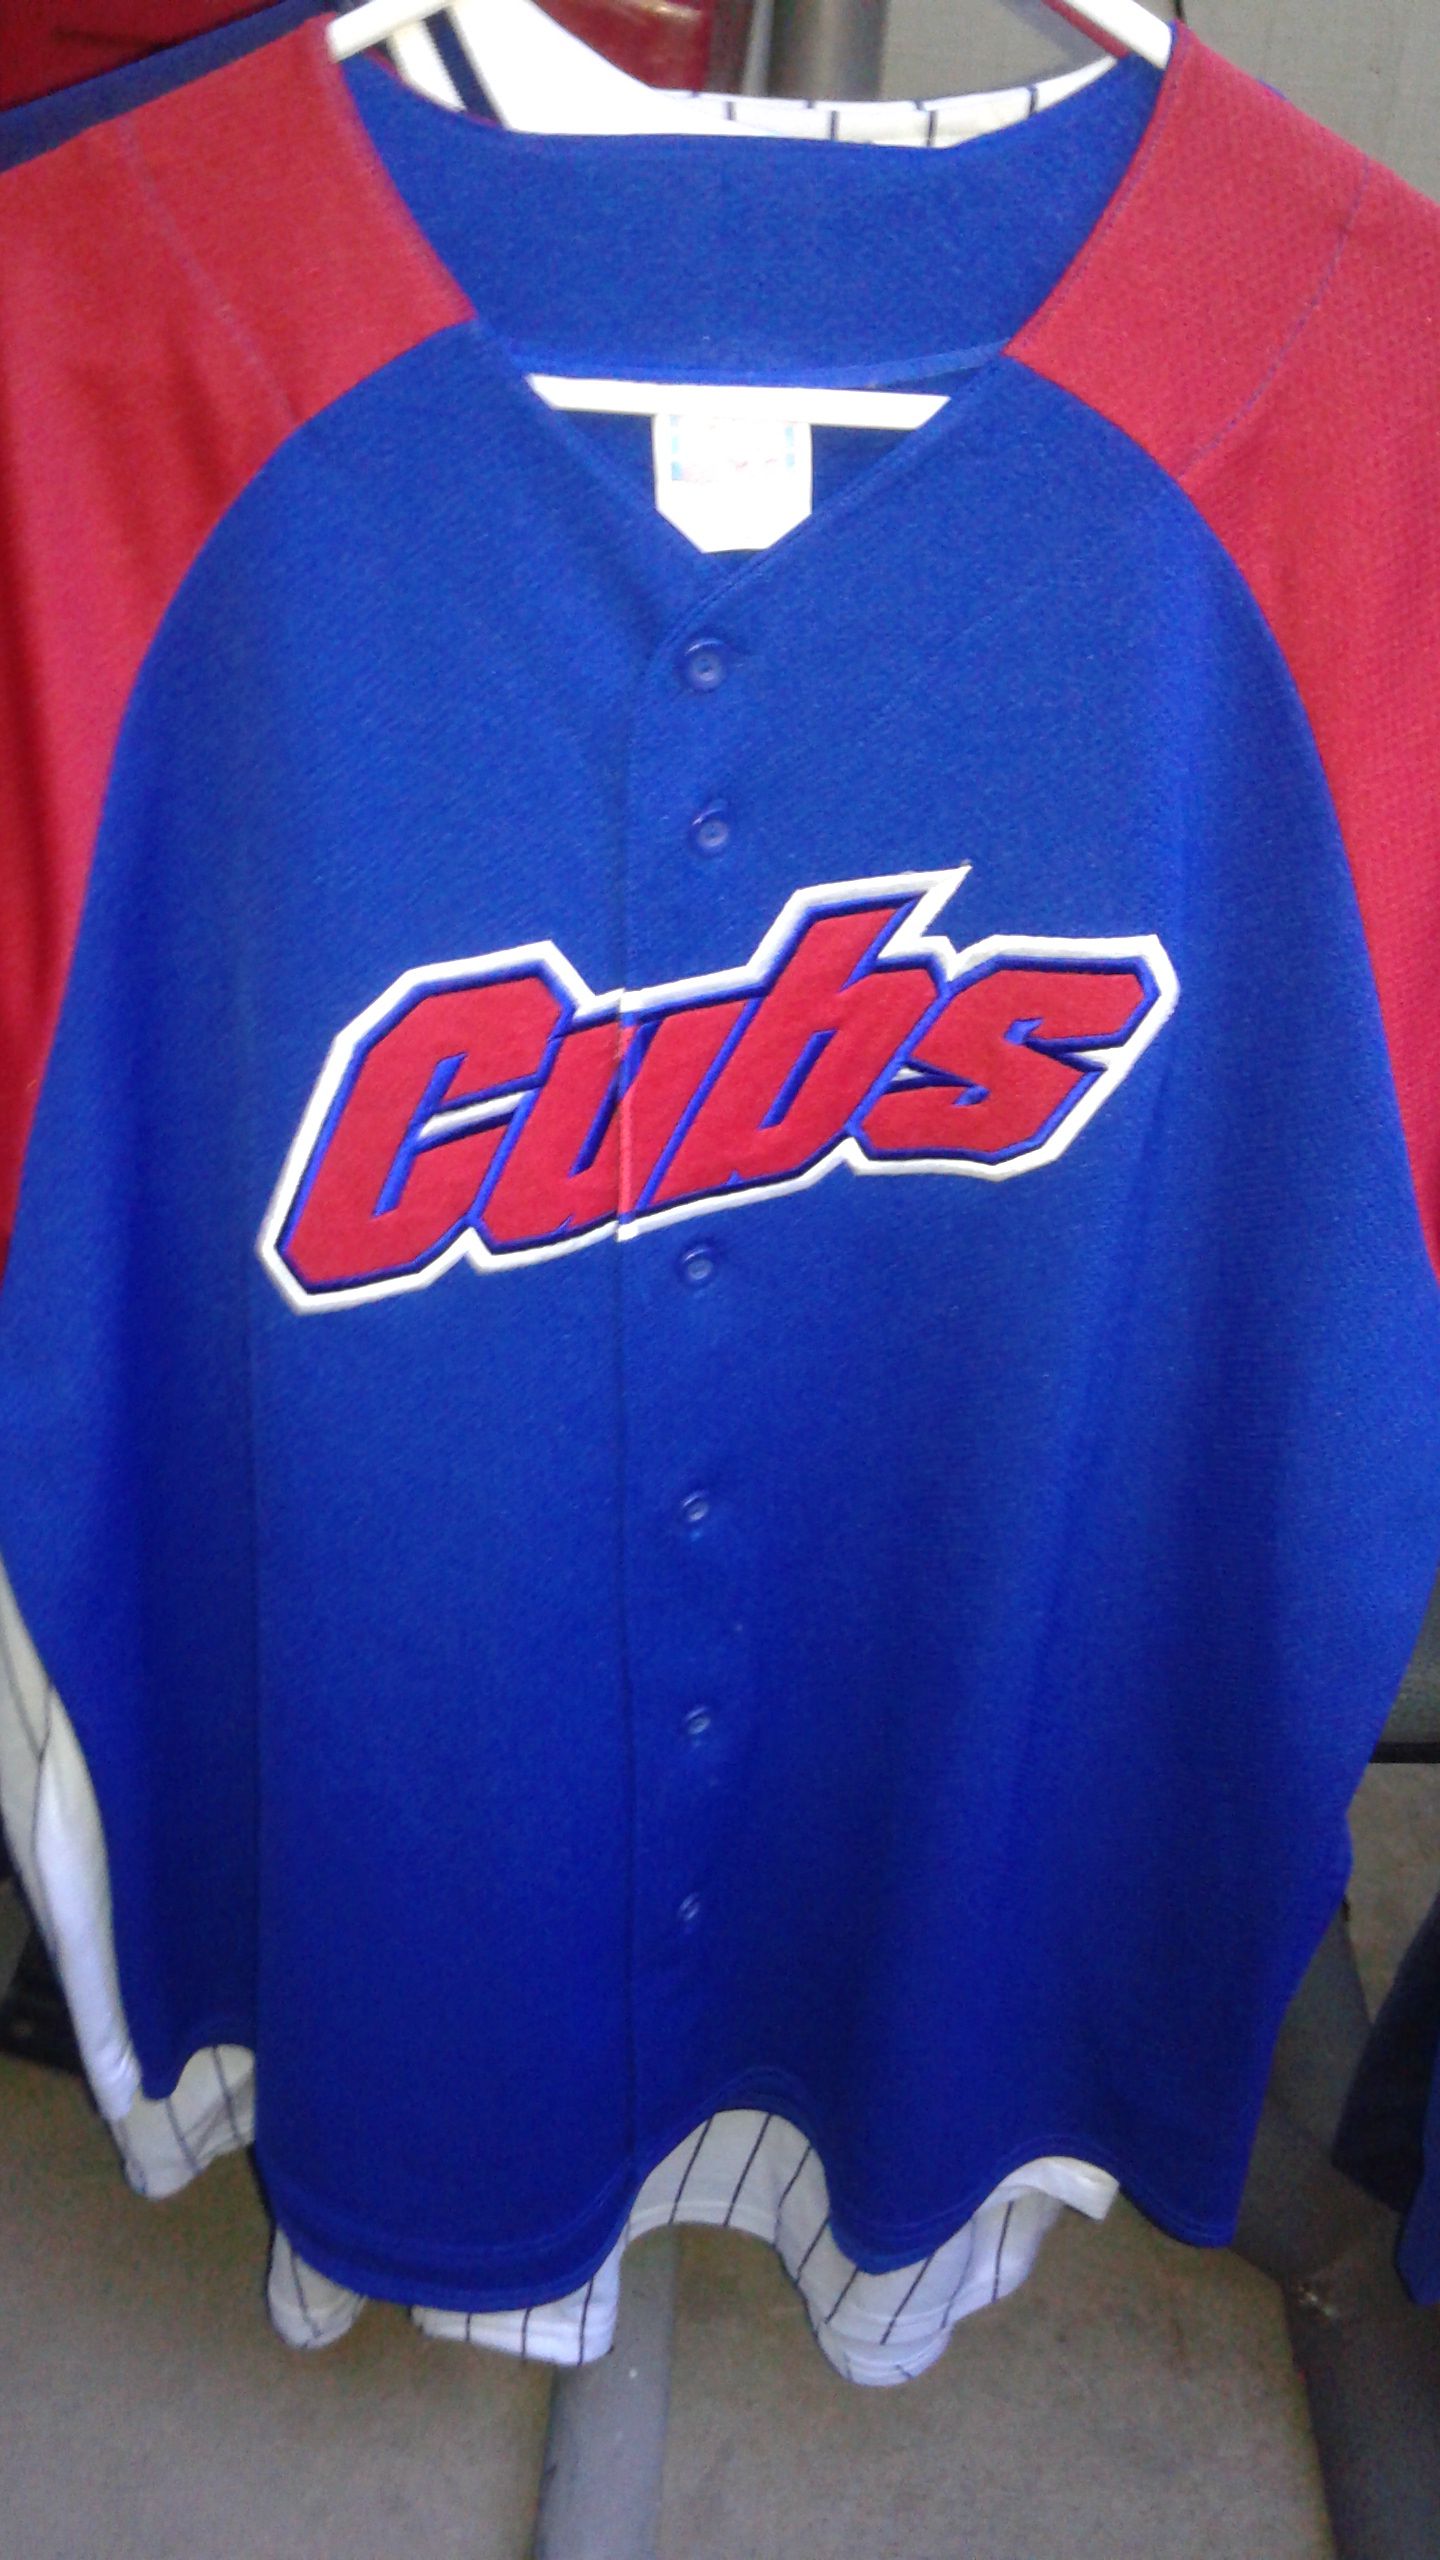 Chicago Cubs baseball jersey for Sale in El Paso, TX - OfferUp